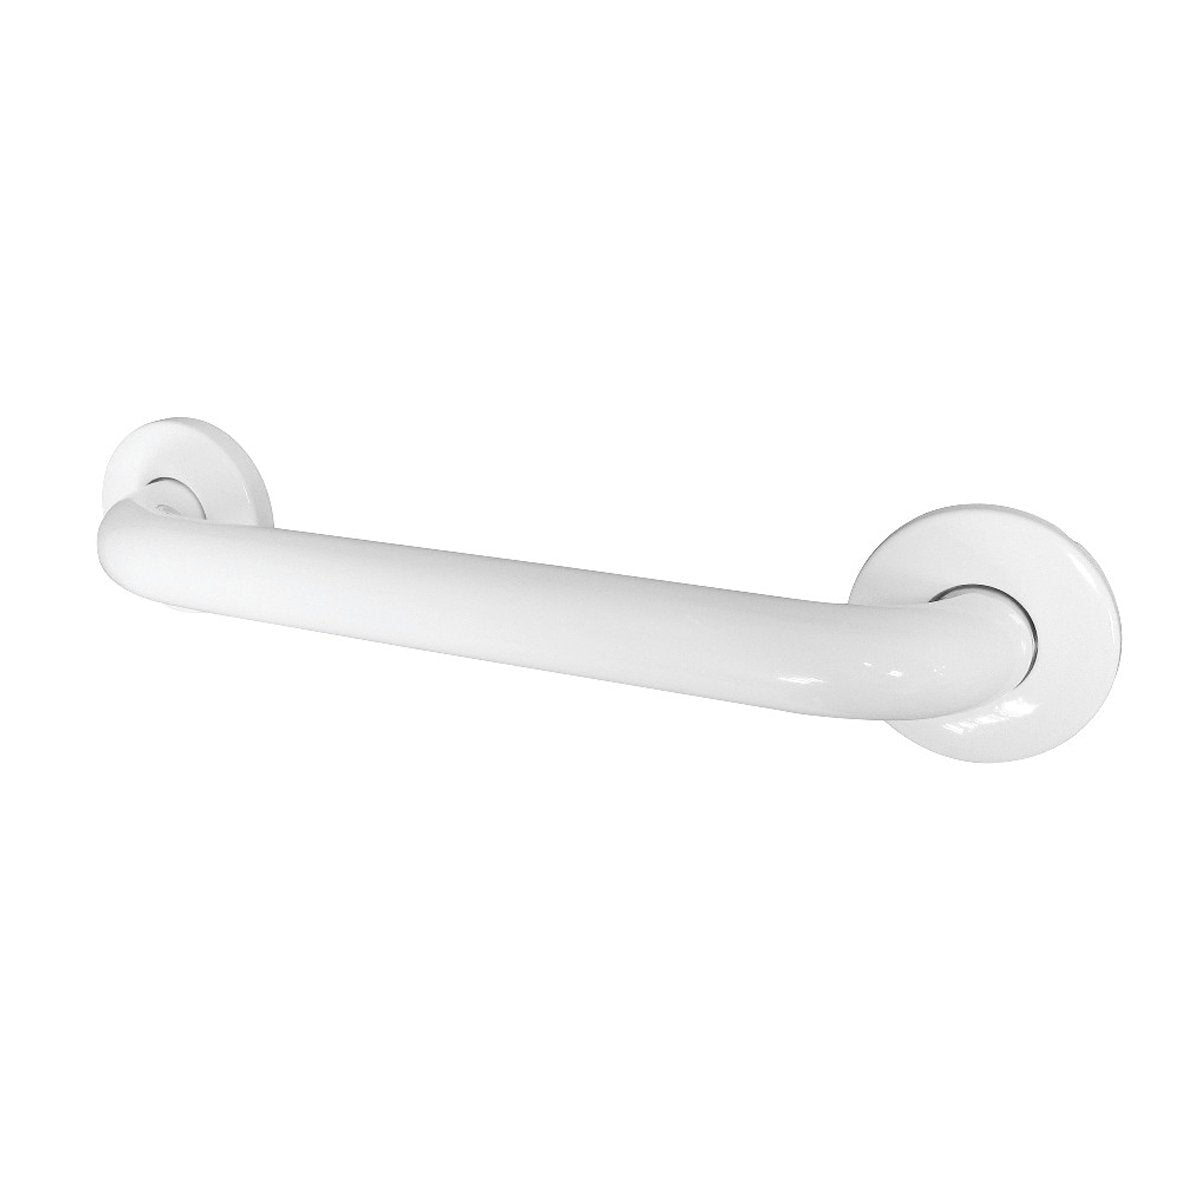 Kingston Brass Made To Match 12-Inch Stainless Steel Grab Bar in White